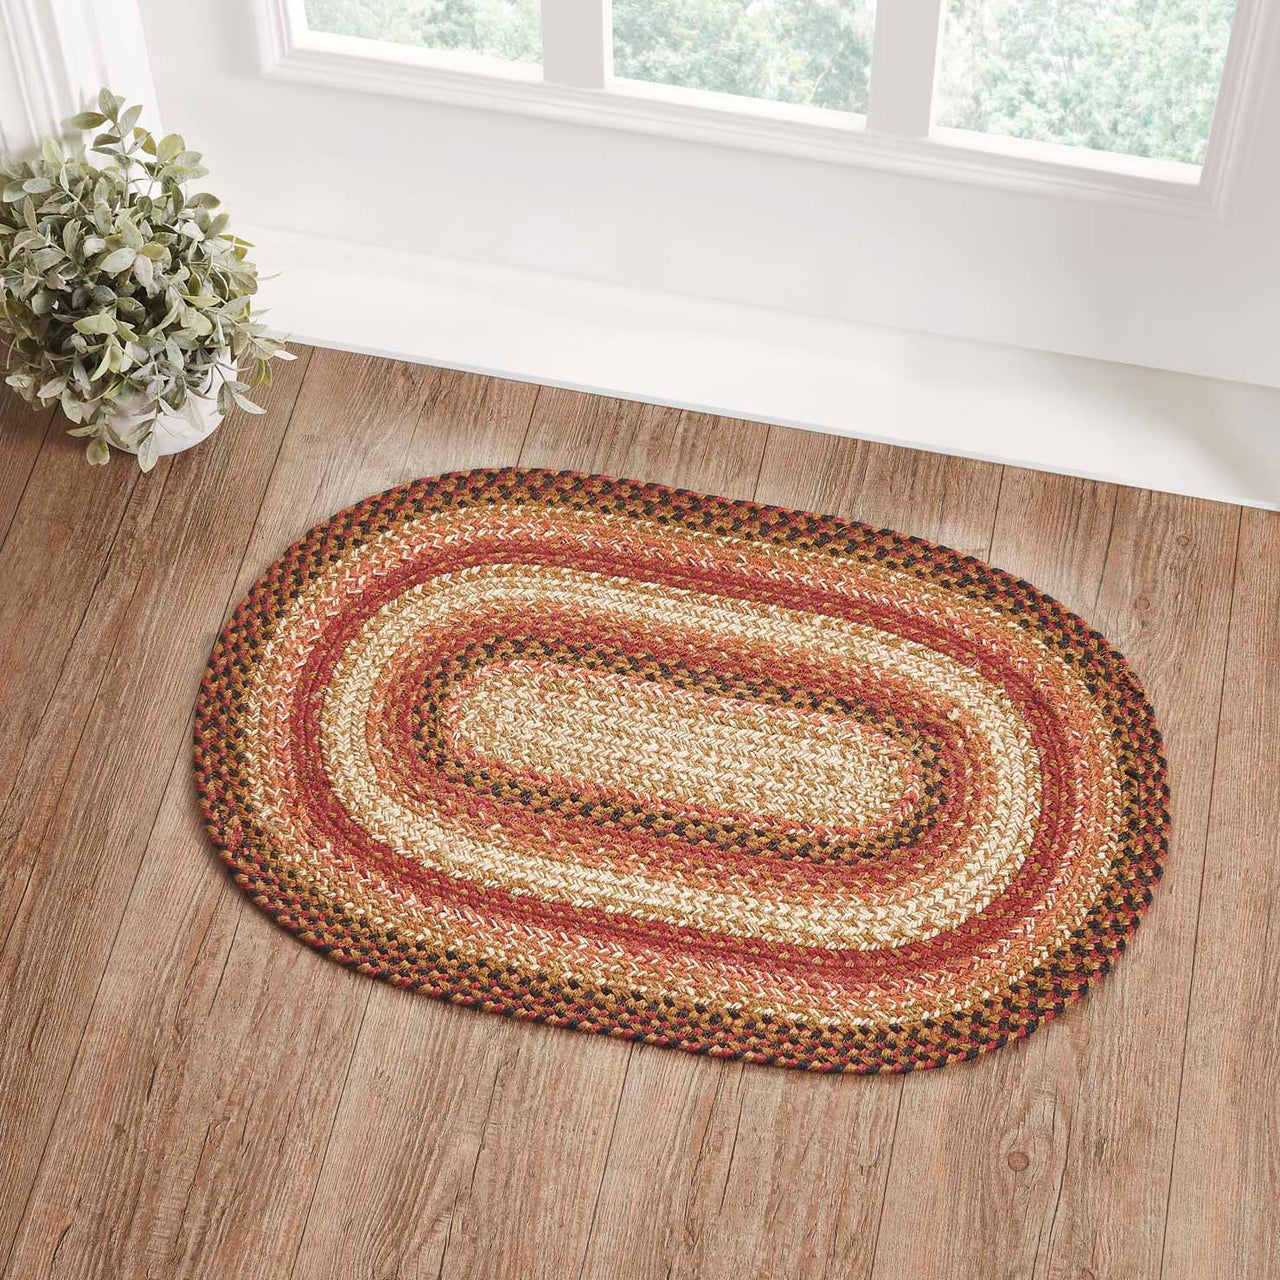 Ginger Spice Jute Braided Rug Oval with Rug Pad 20"x30" VHC Brands